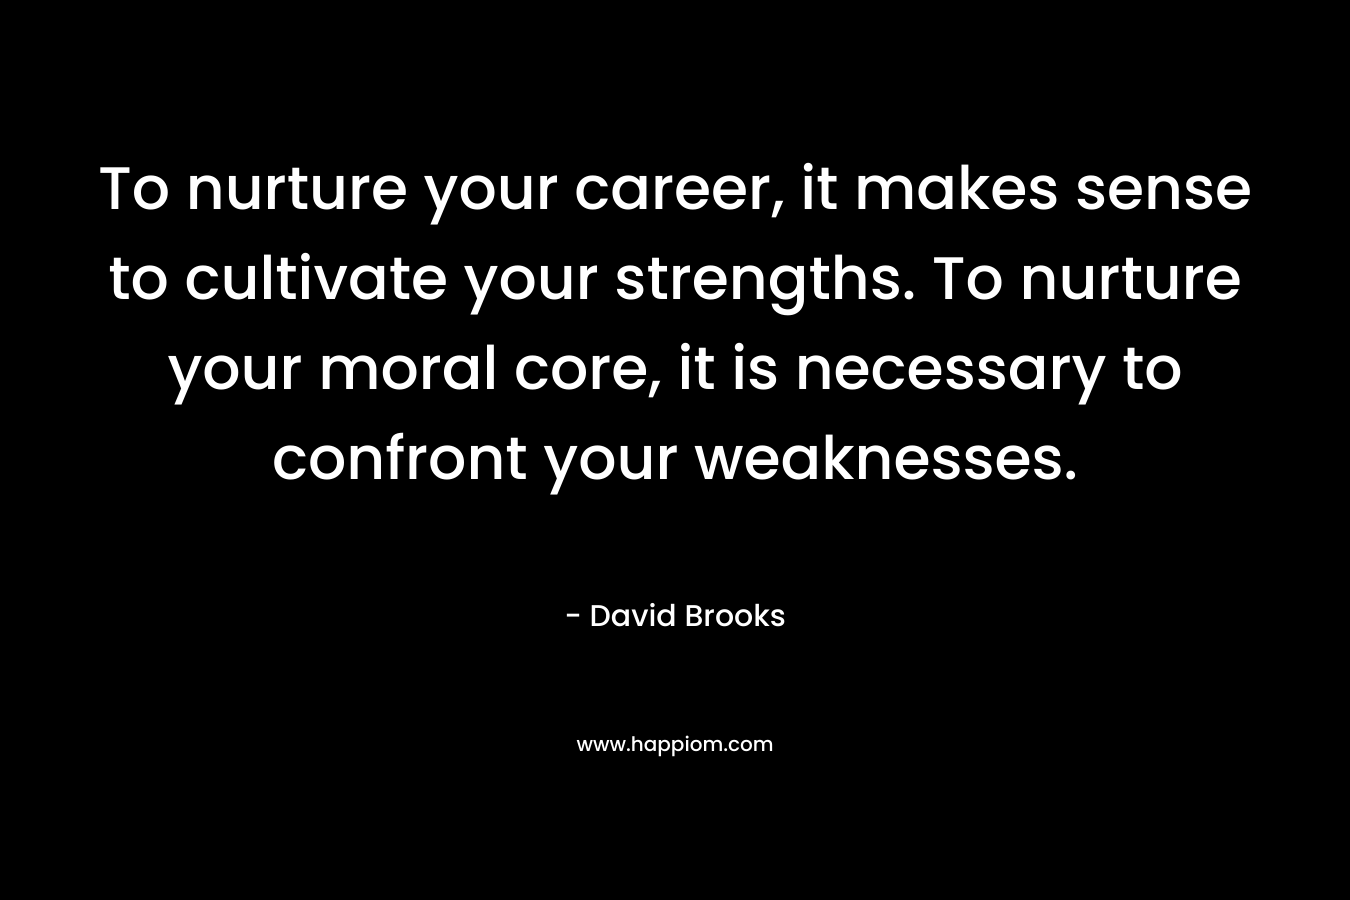 To nurture your career, it makes sense to cultivate your strengths. To nurture your moral core, it is necessary to confront your weaknesses. – David Brooks